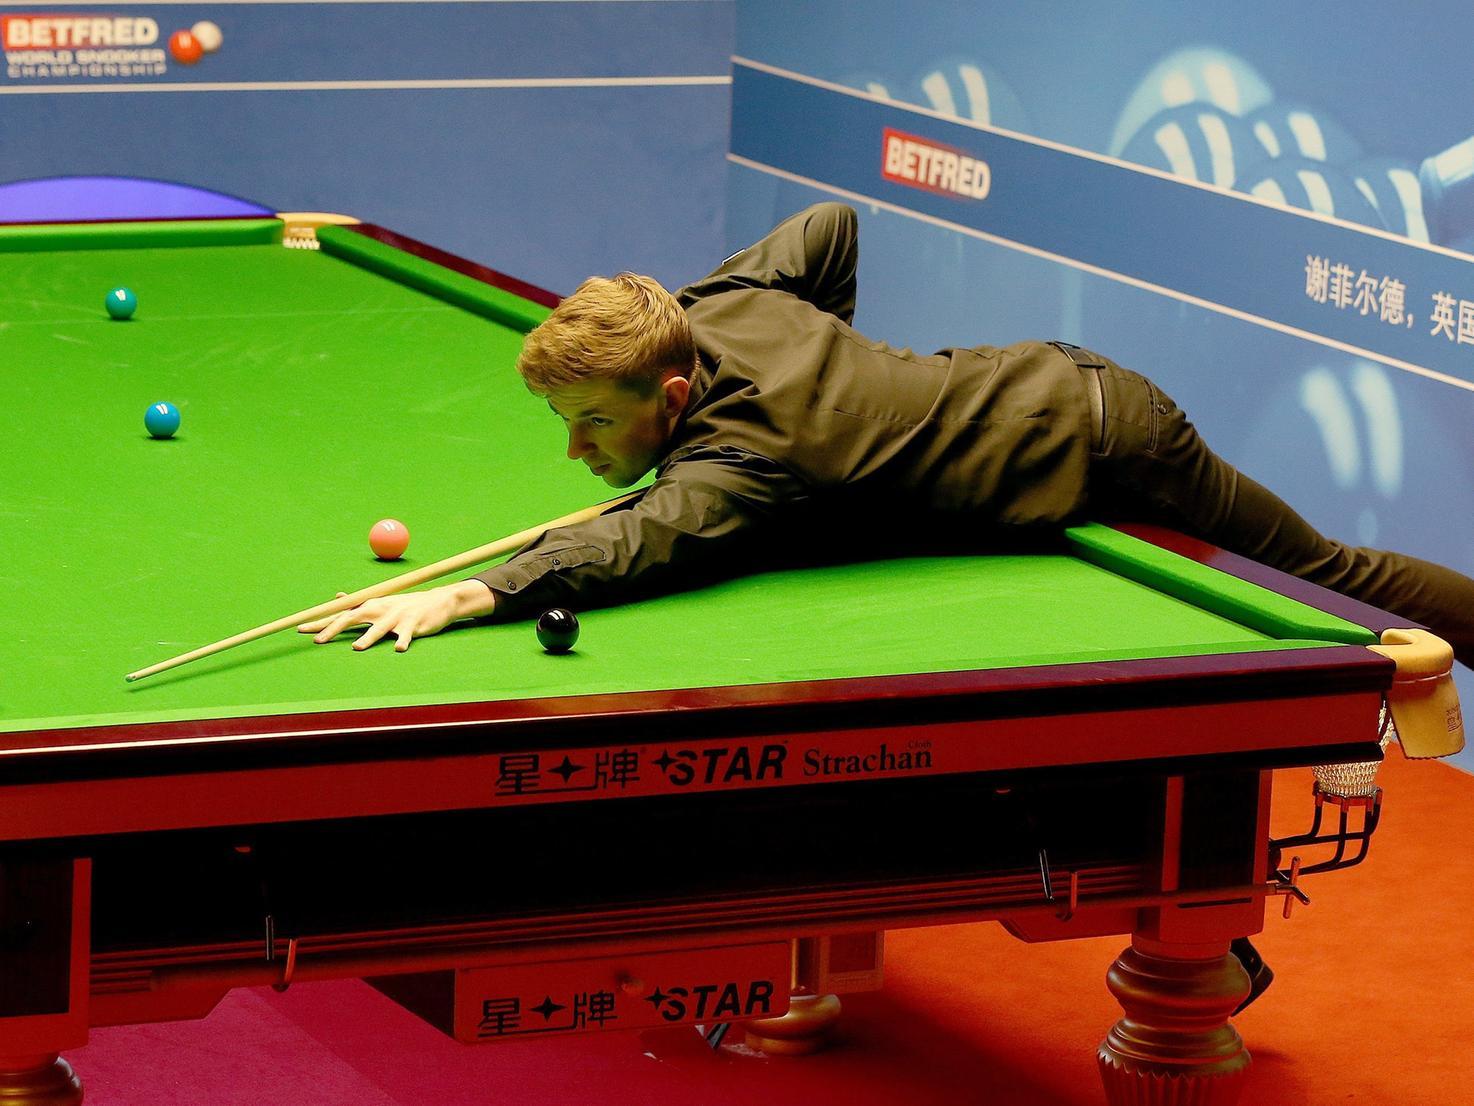 Blackpool snooker star James Cahill calls for public draws after latest first-round defeat by